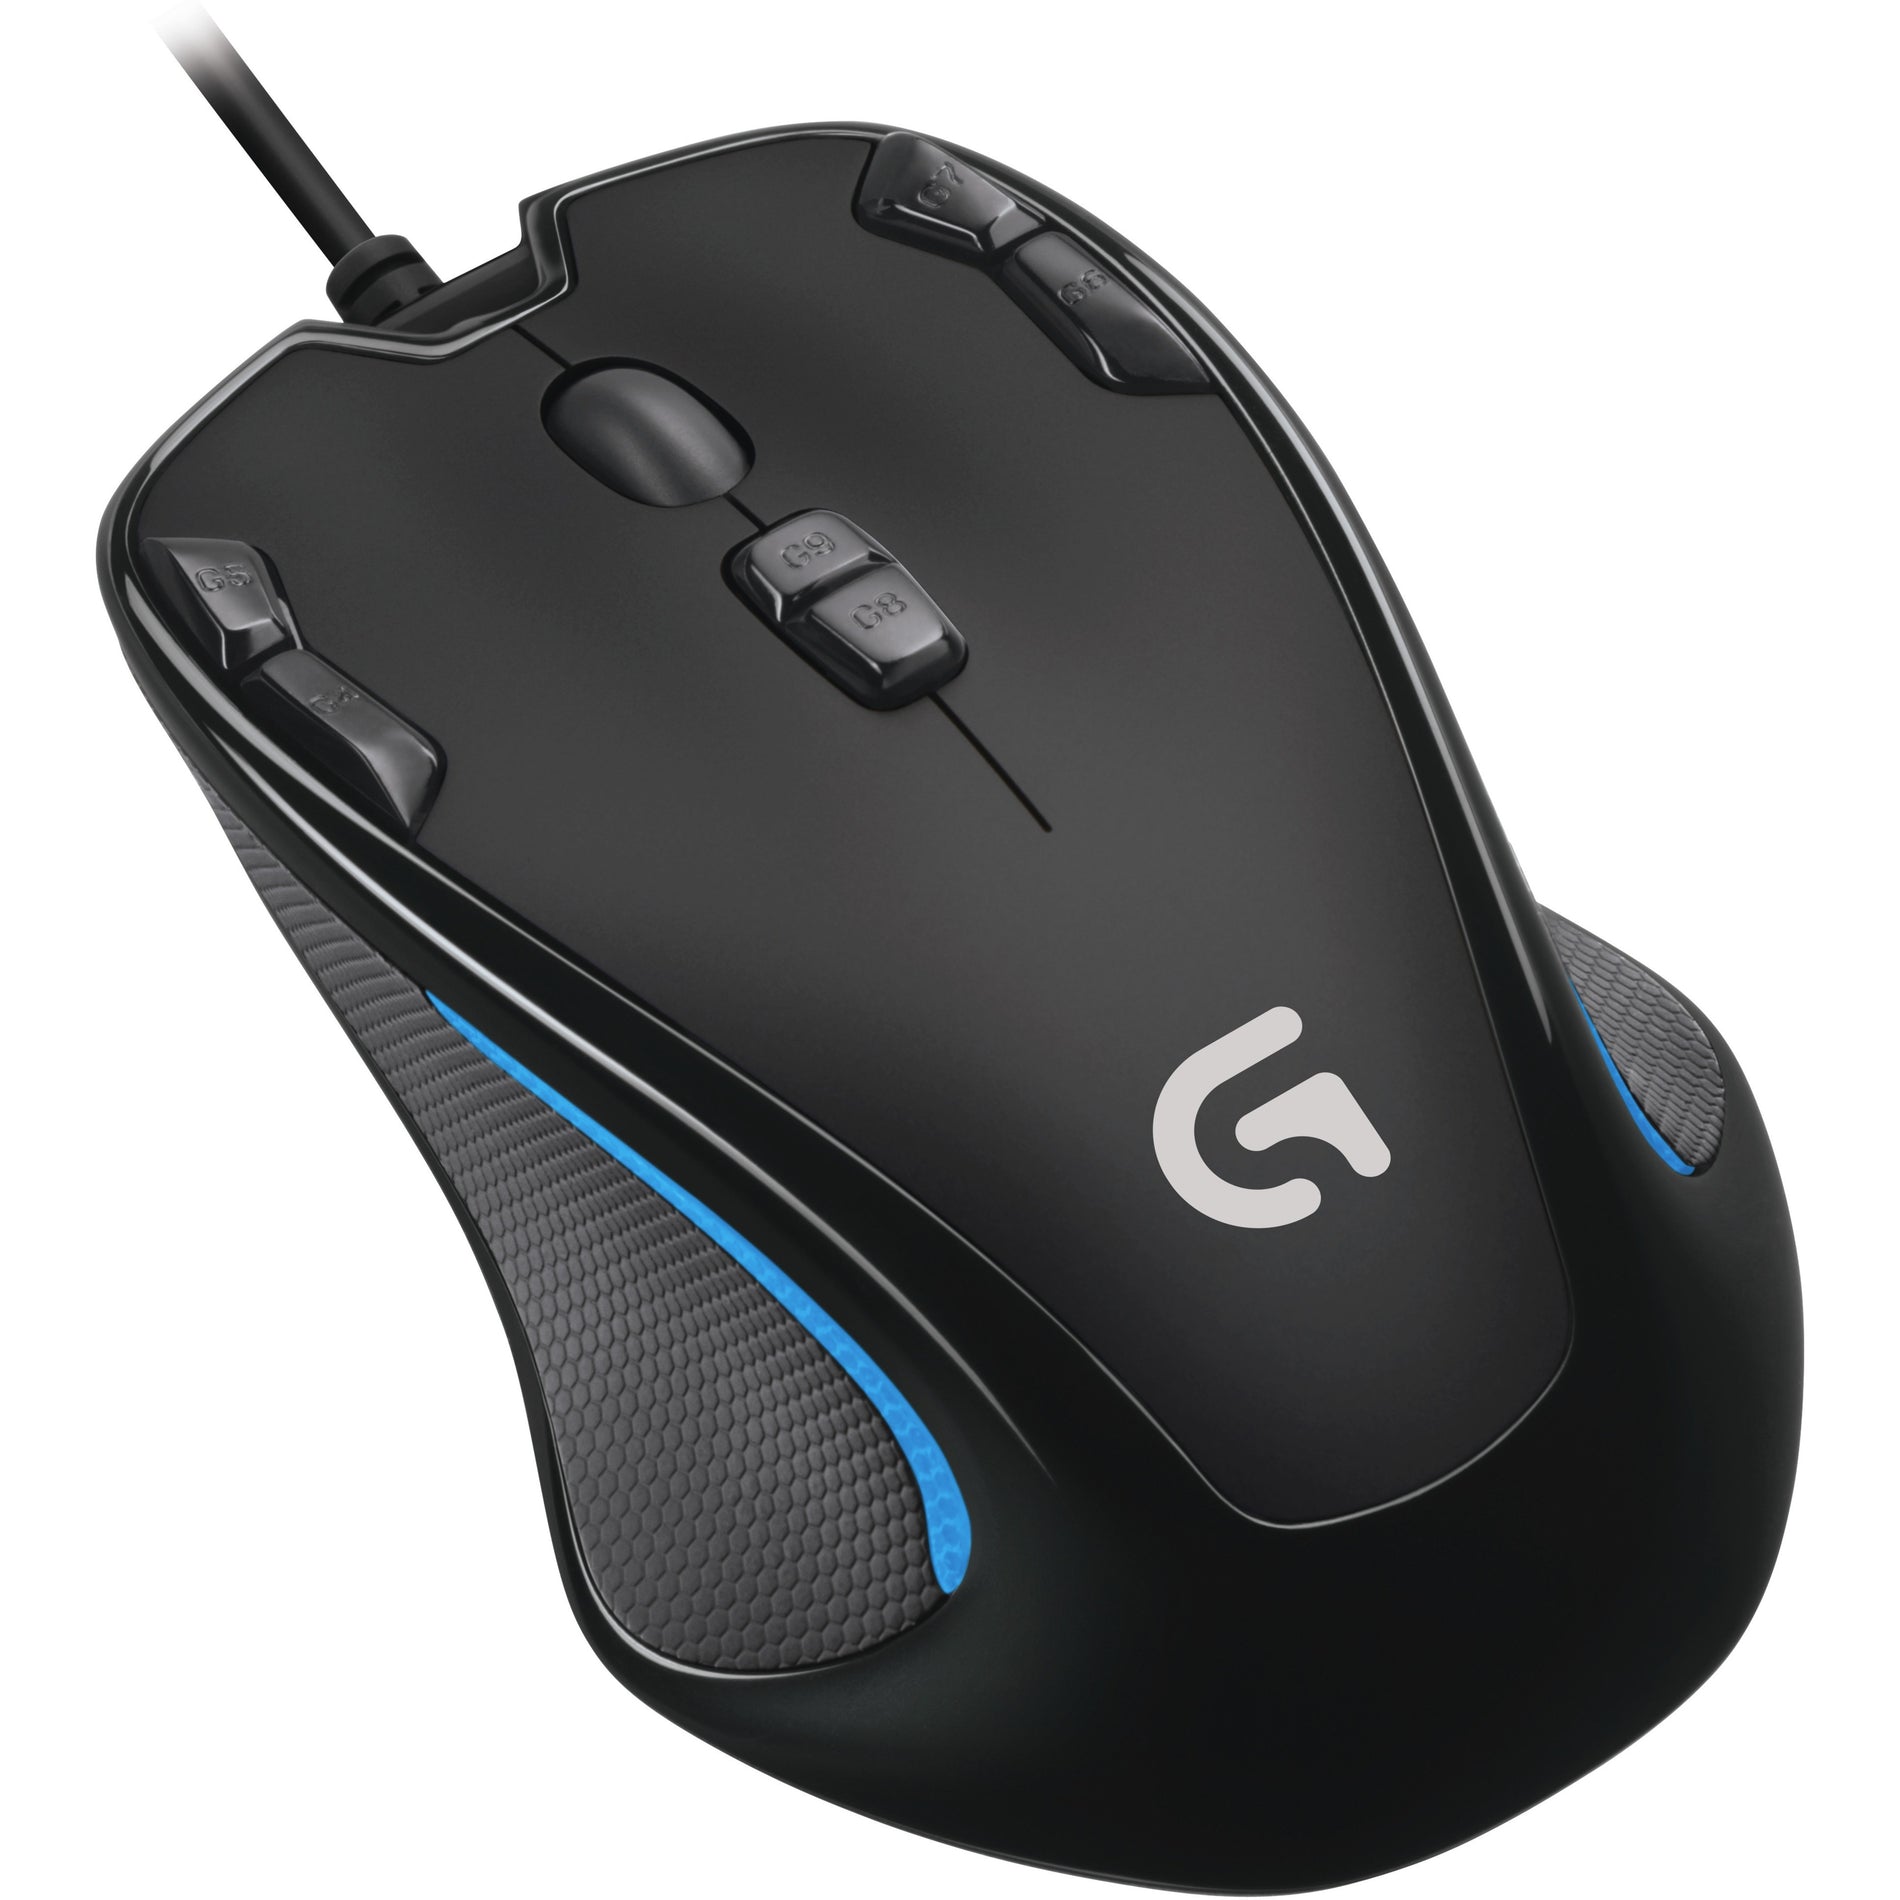 Logitech 910-004360 G300S Optical Gaming Mouse, 9 Buttons, 2500 DPI, USB Wired